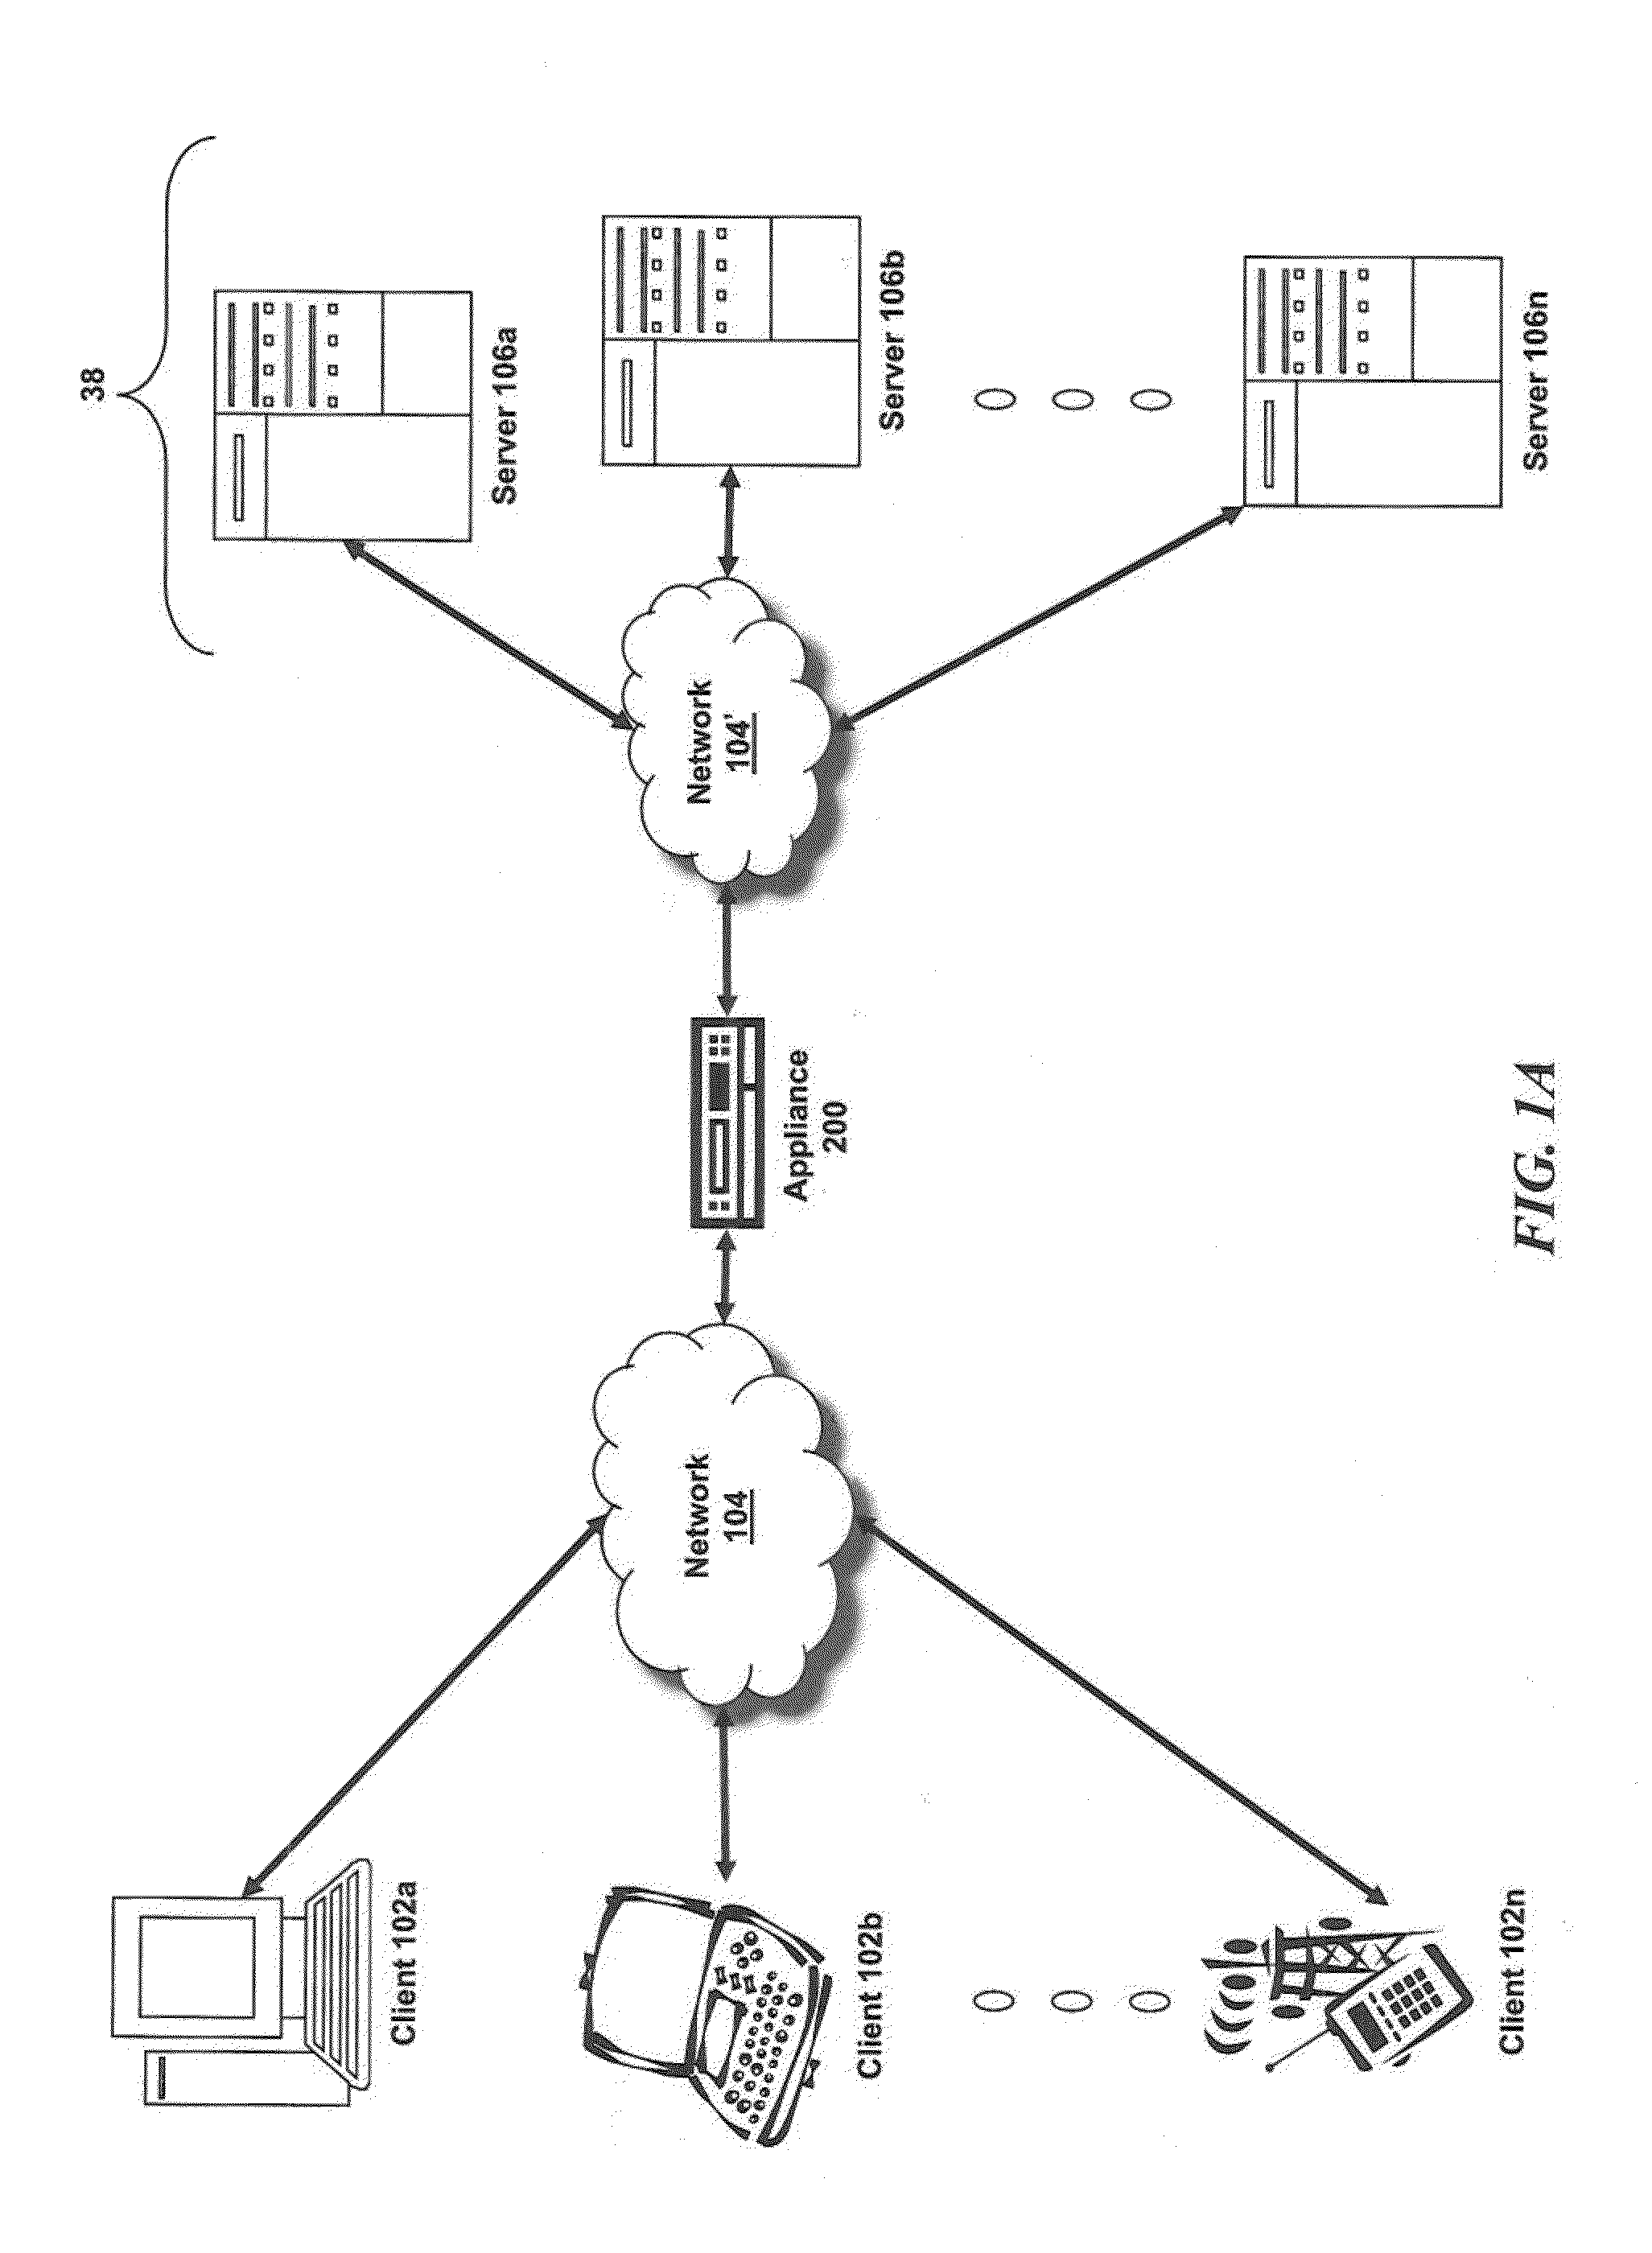 Systems and methods for reducing denial of service attacks against dynamically generated next secure records